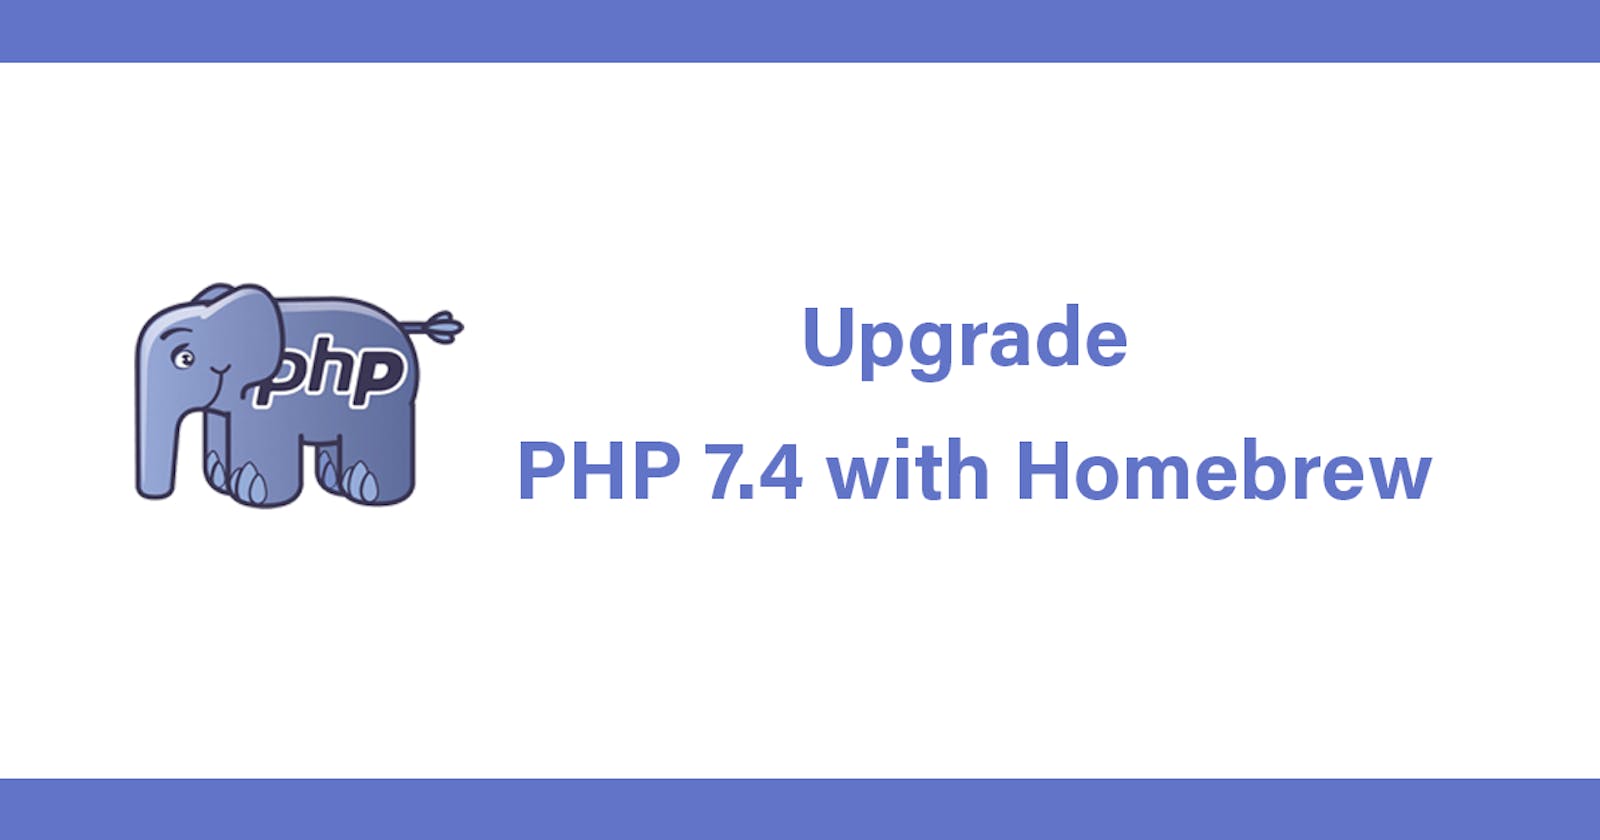 Upgrade PHP 7.4 with Homebrew